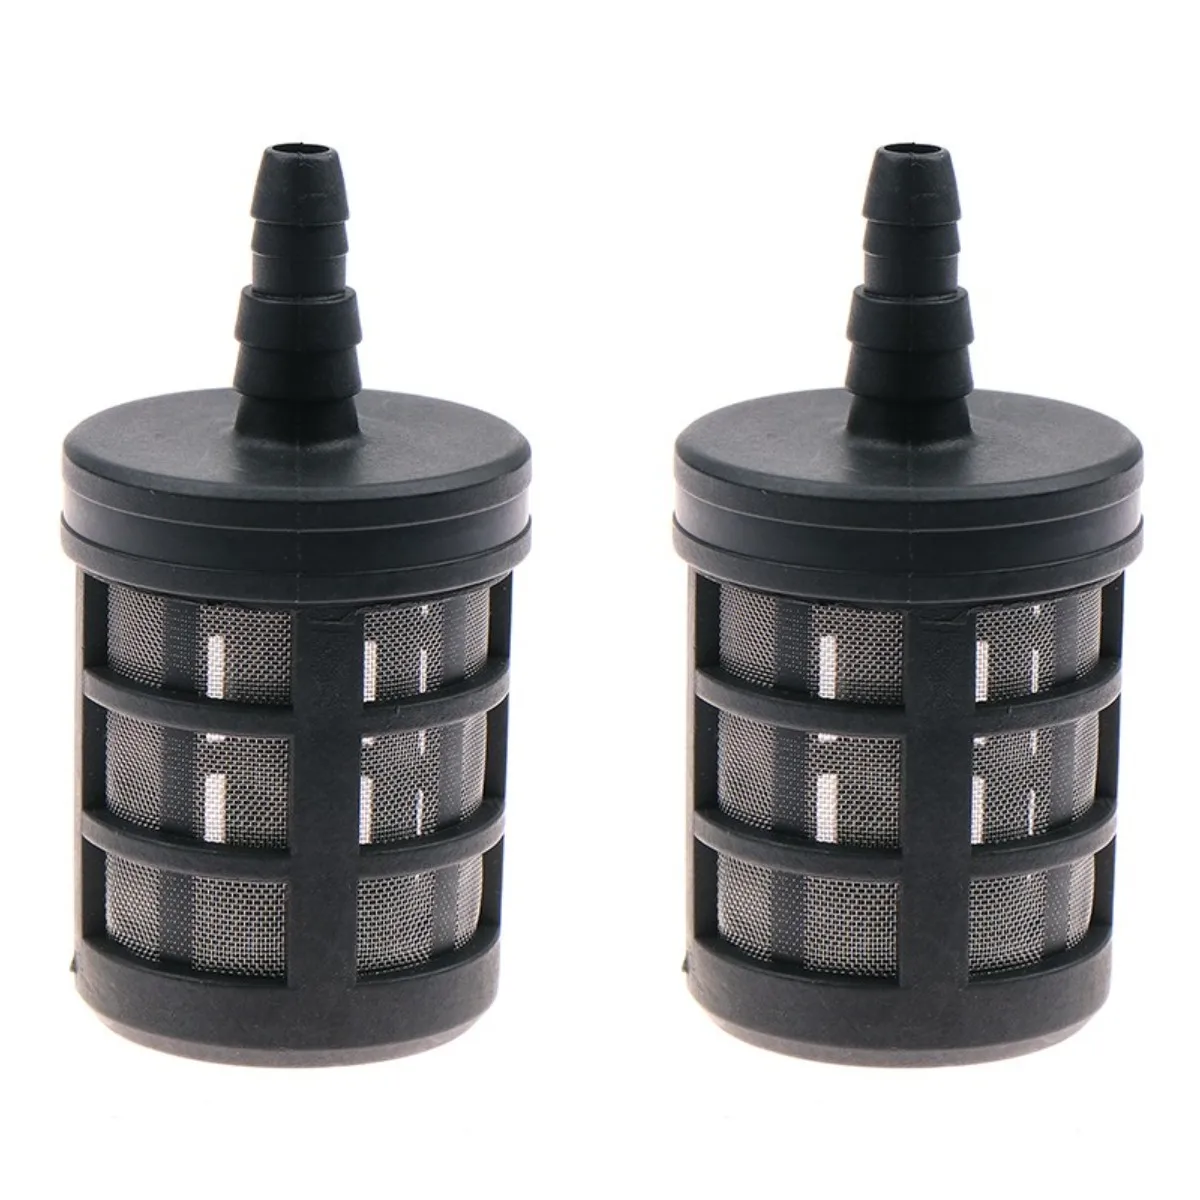 

1PC Pressure Washers Filters Inlet Water Pipeline Filter Stainless Steel Quick Connect Self-Priming Joint Car Washer Part-Black